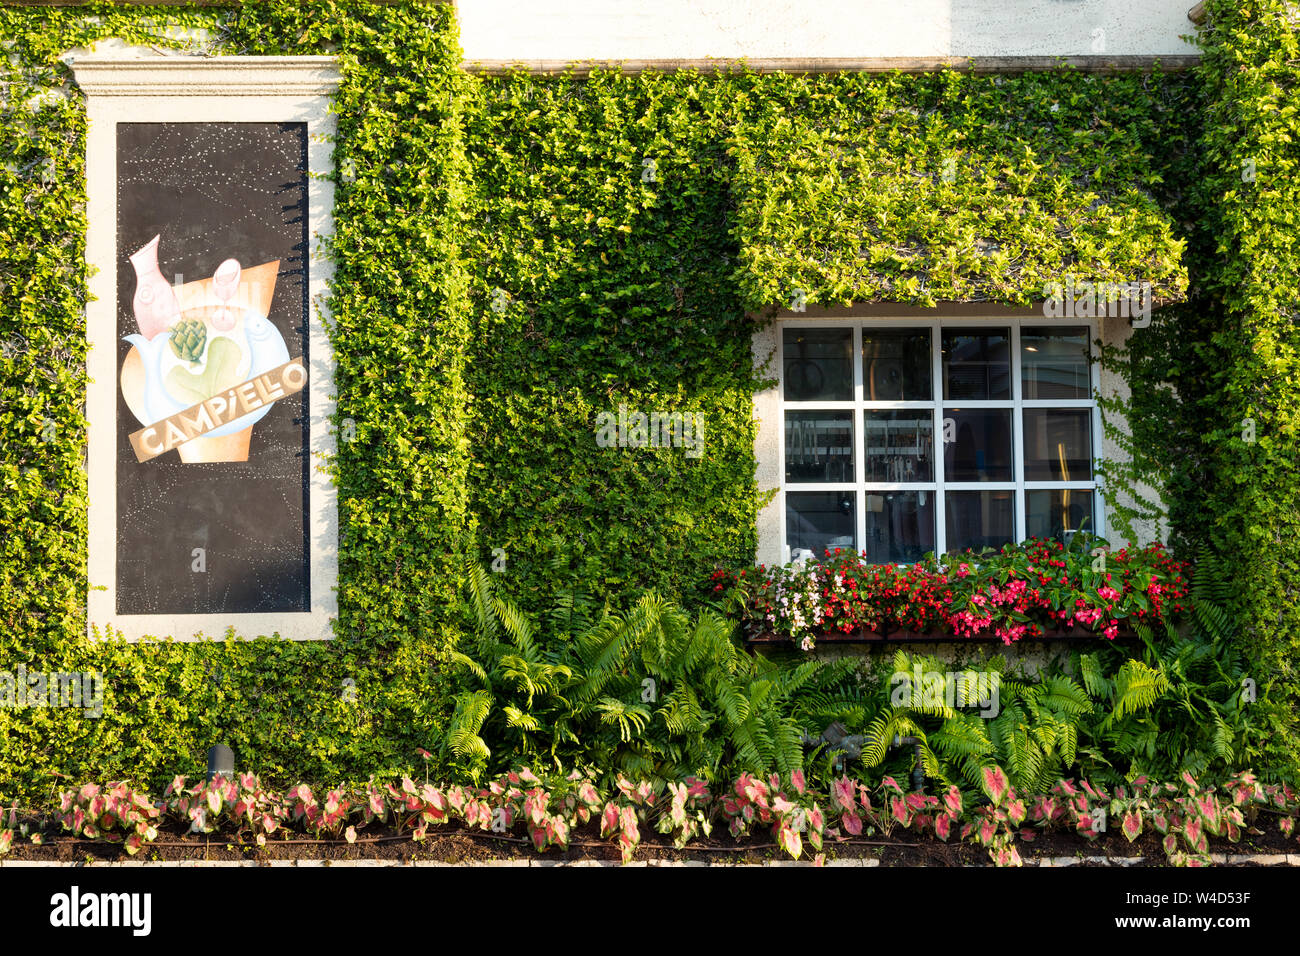 Evening sunlight on the Ivy covered wall of Campiellos Restaurant, Naples, Florida, USA Stock Photo